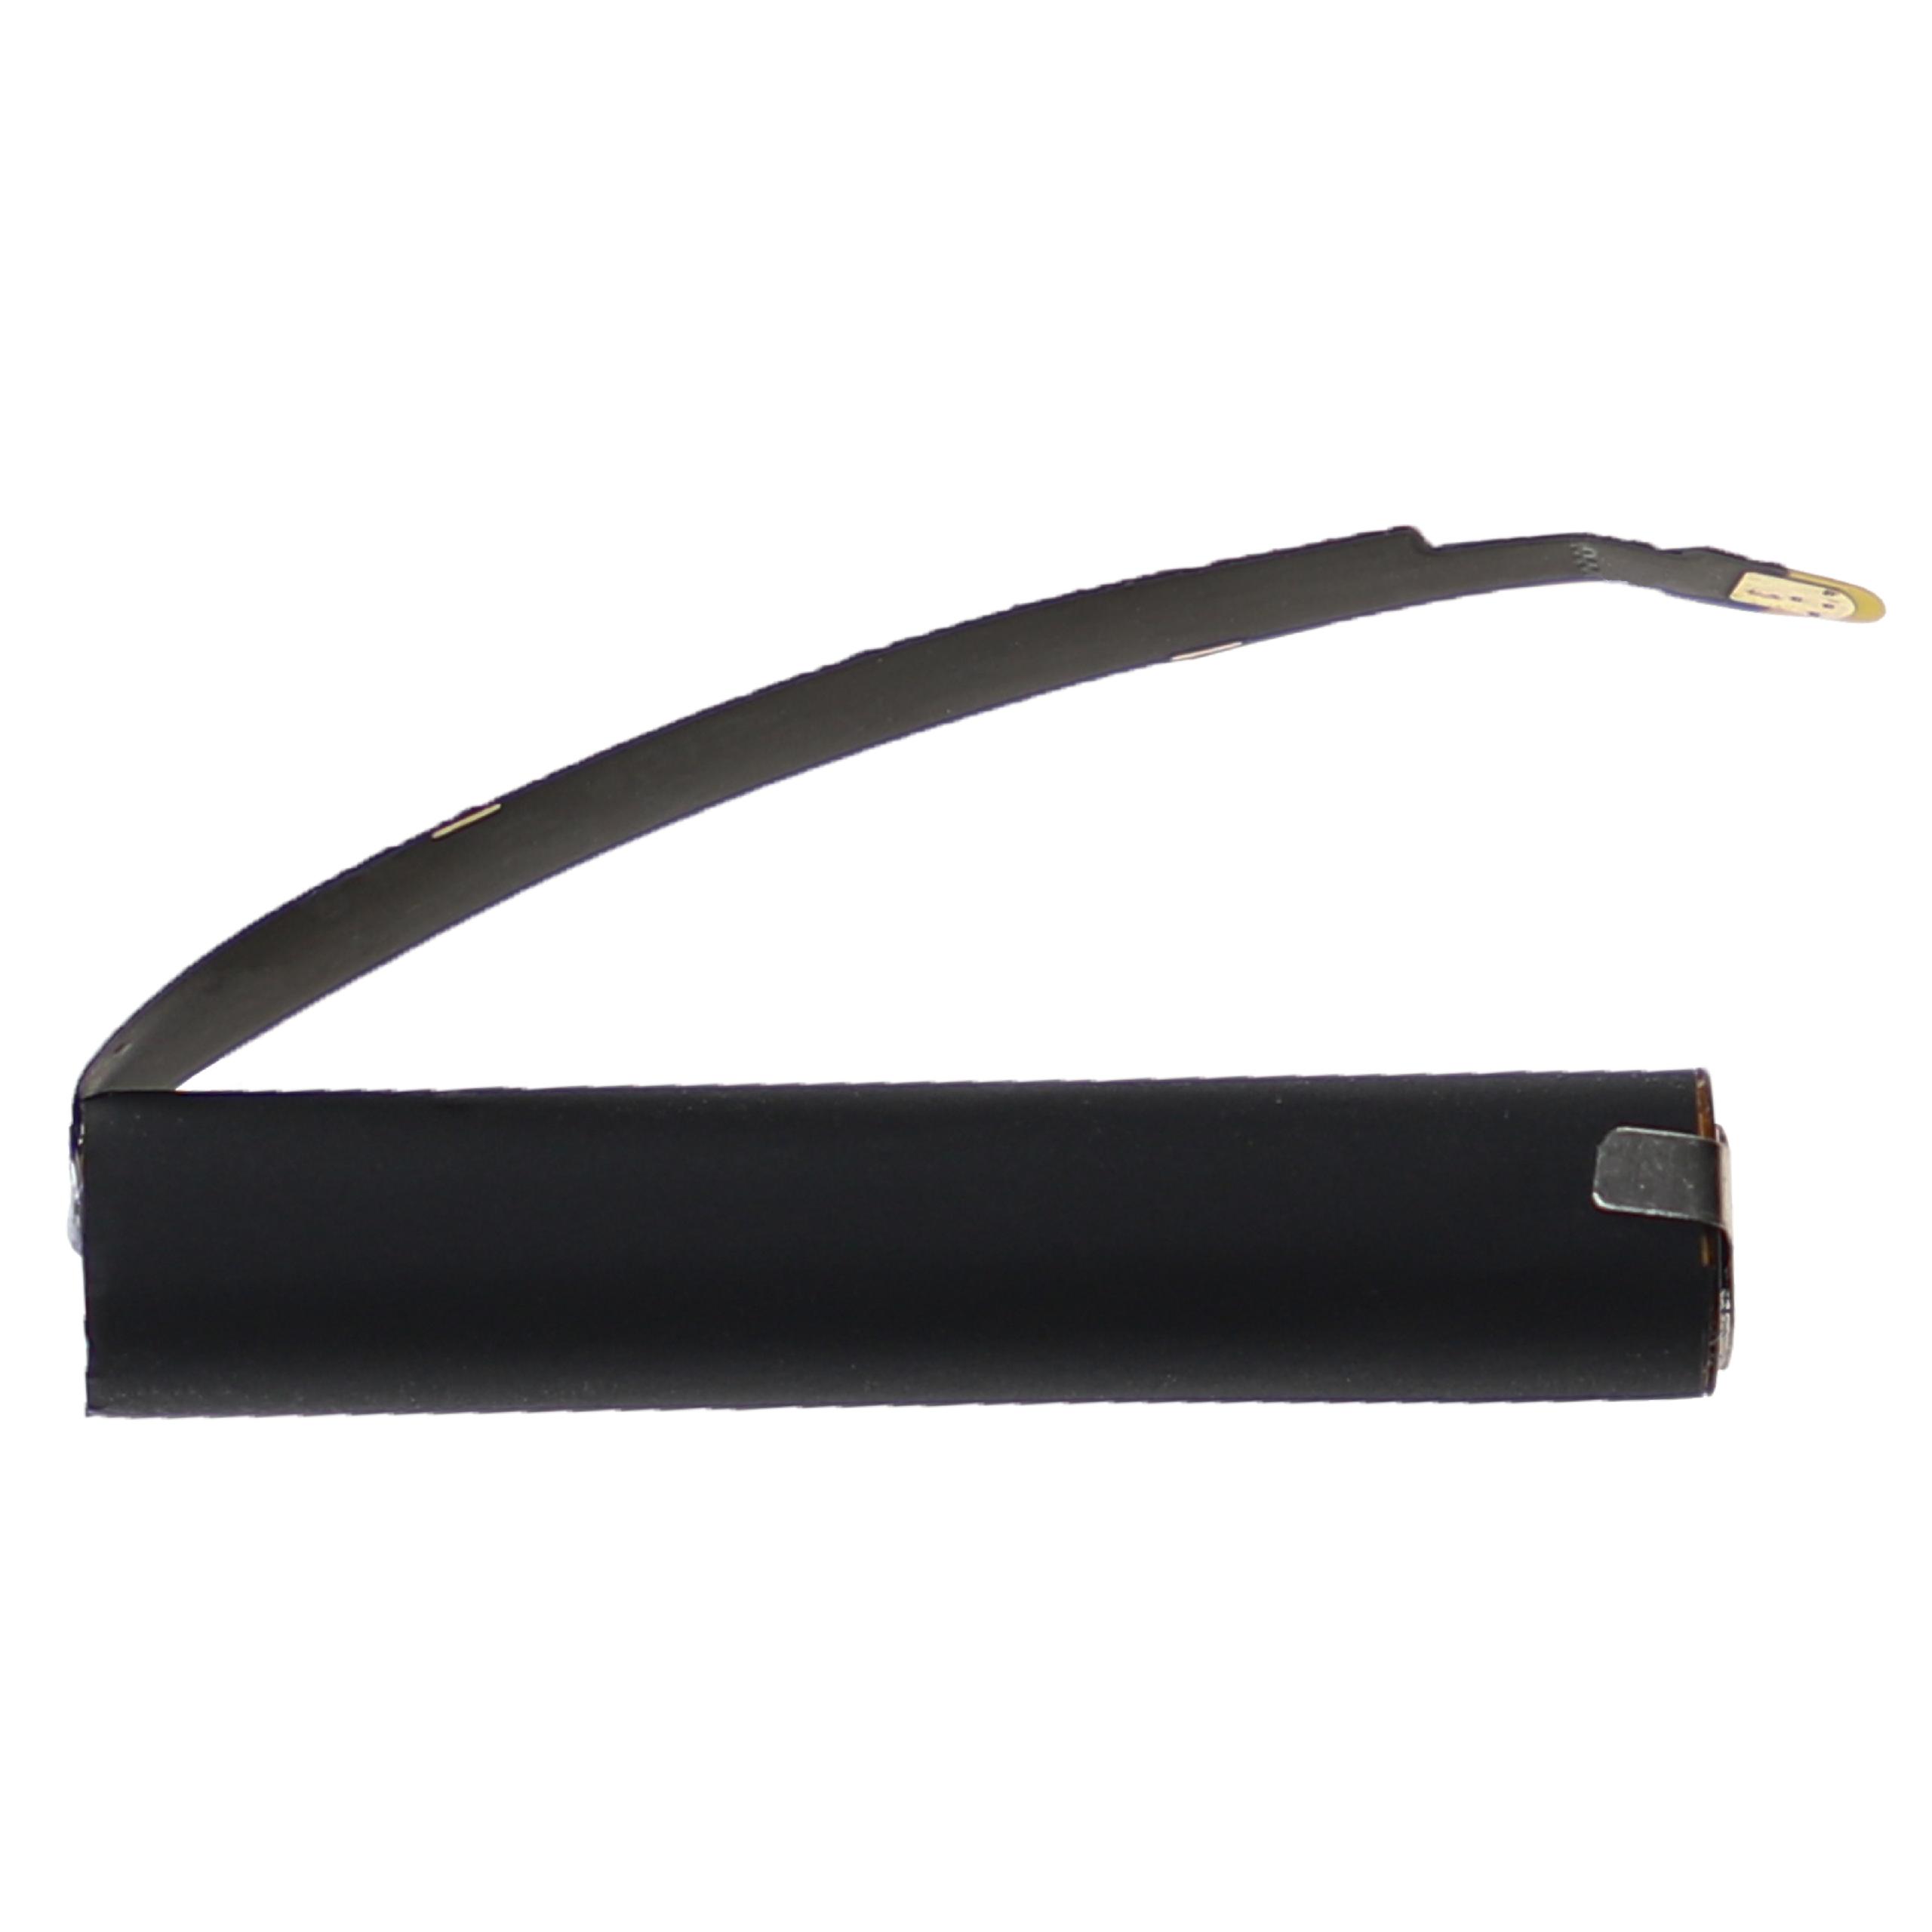 Wireless Headset Battery Replacement for Apple A2032, A2031, A1523, A1722, A1604 - 25mAh 3.7V Li-Ion